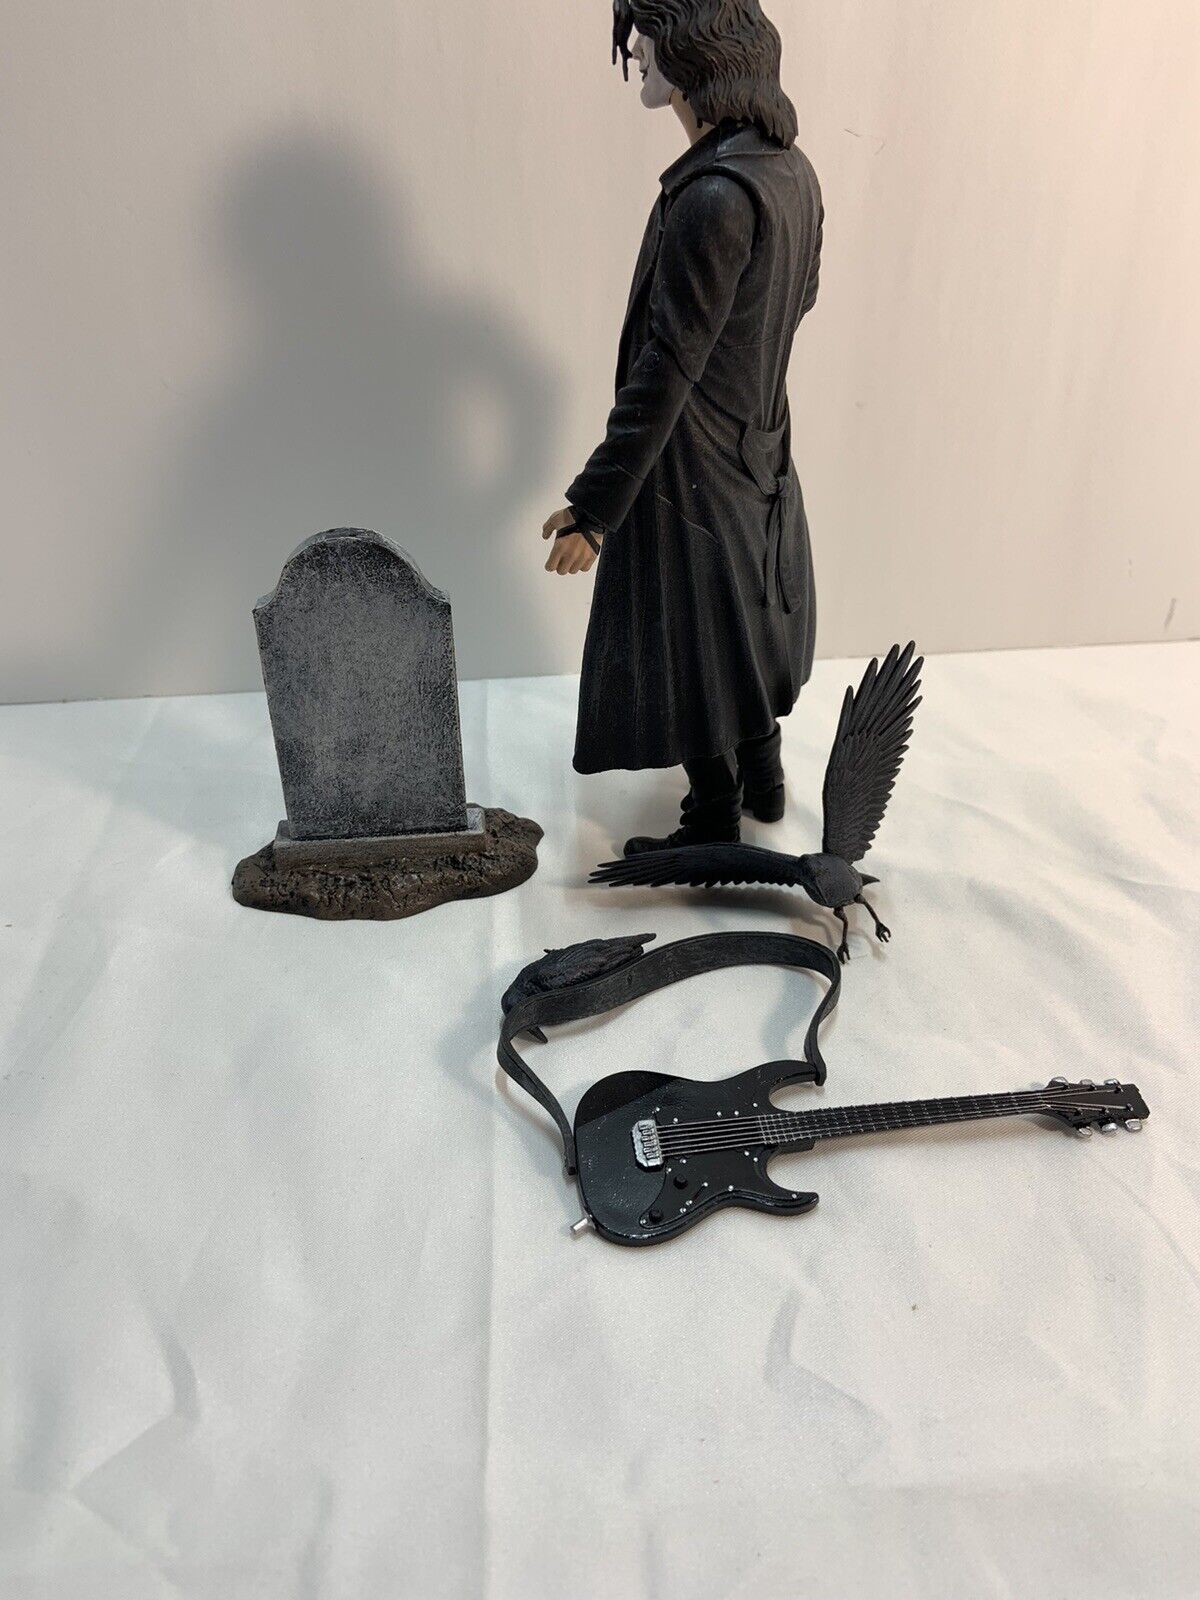 Diamond Select Toys 1994 Movie The Crow (Eric Draven) Deluxe 7" Action Figure